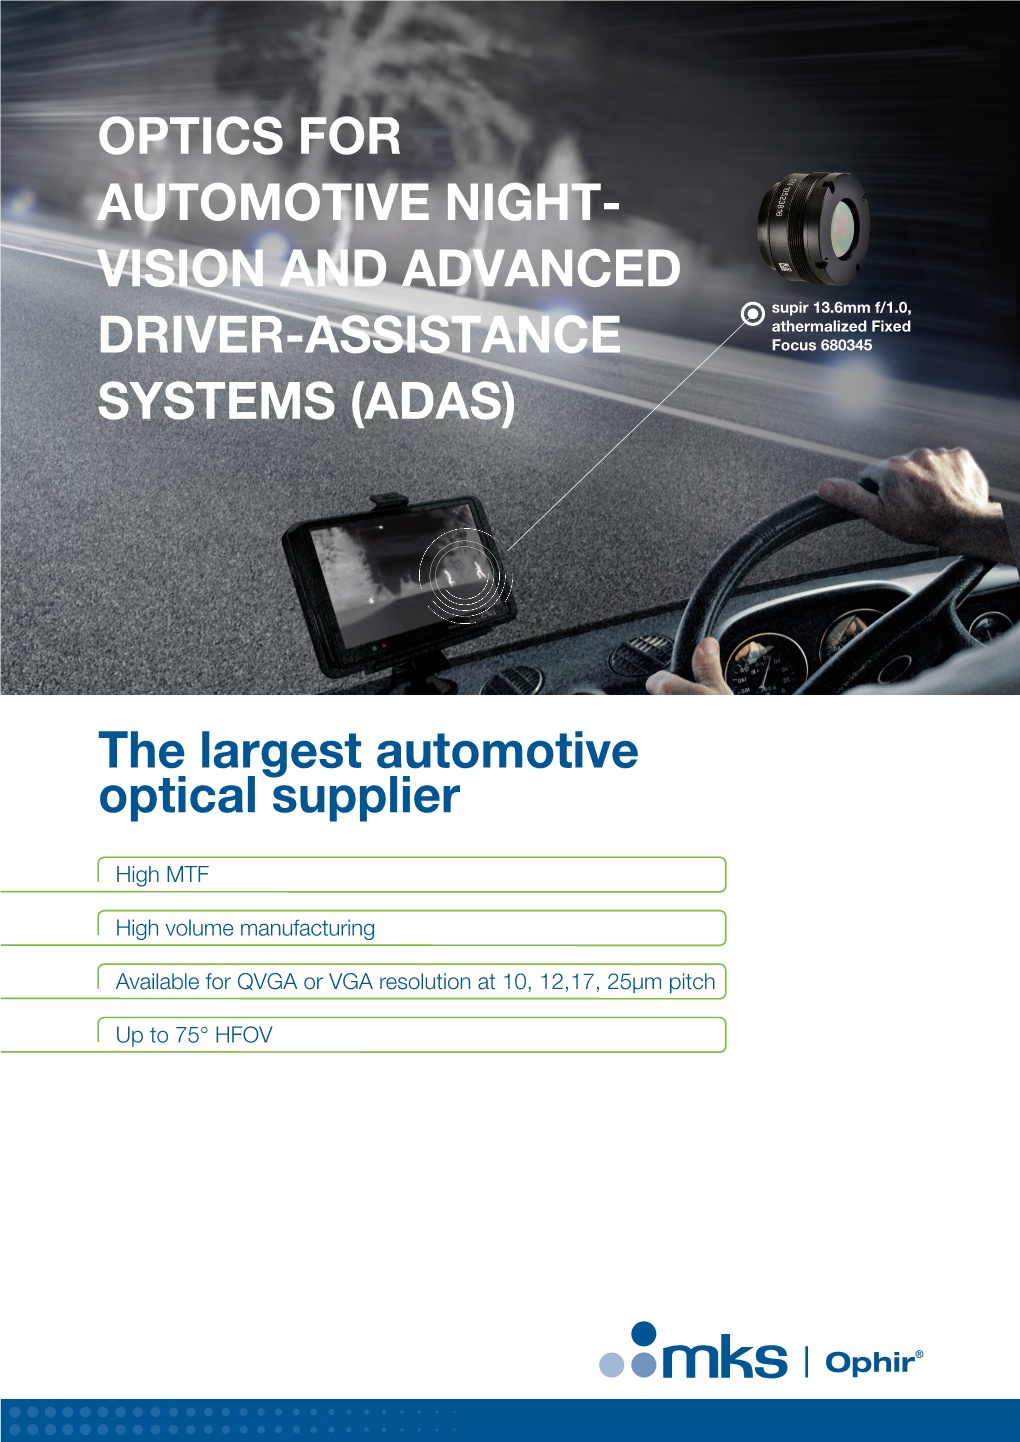 Optics for Automotive Night- Vision and Advanced Supir 13.6Mm F/1.0, Athermalized Fixed Driver-Assistance Focus 680345 Systems (ADAS)